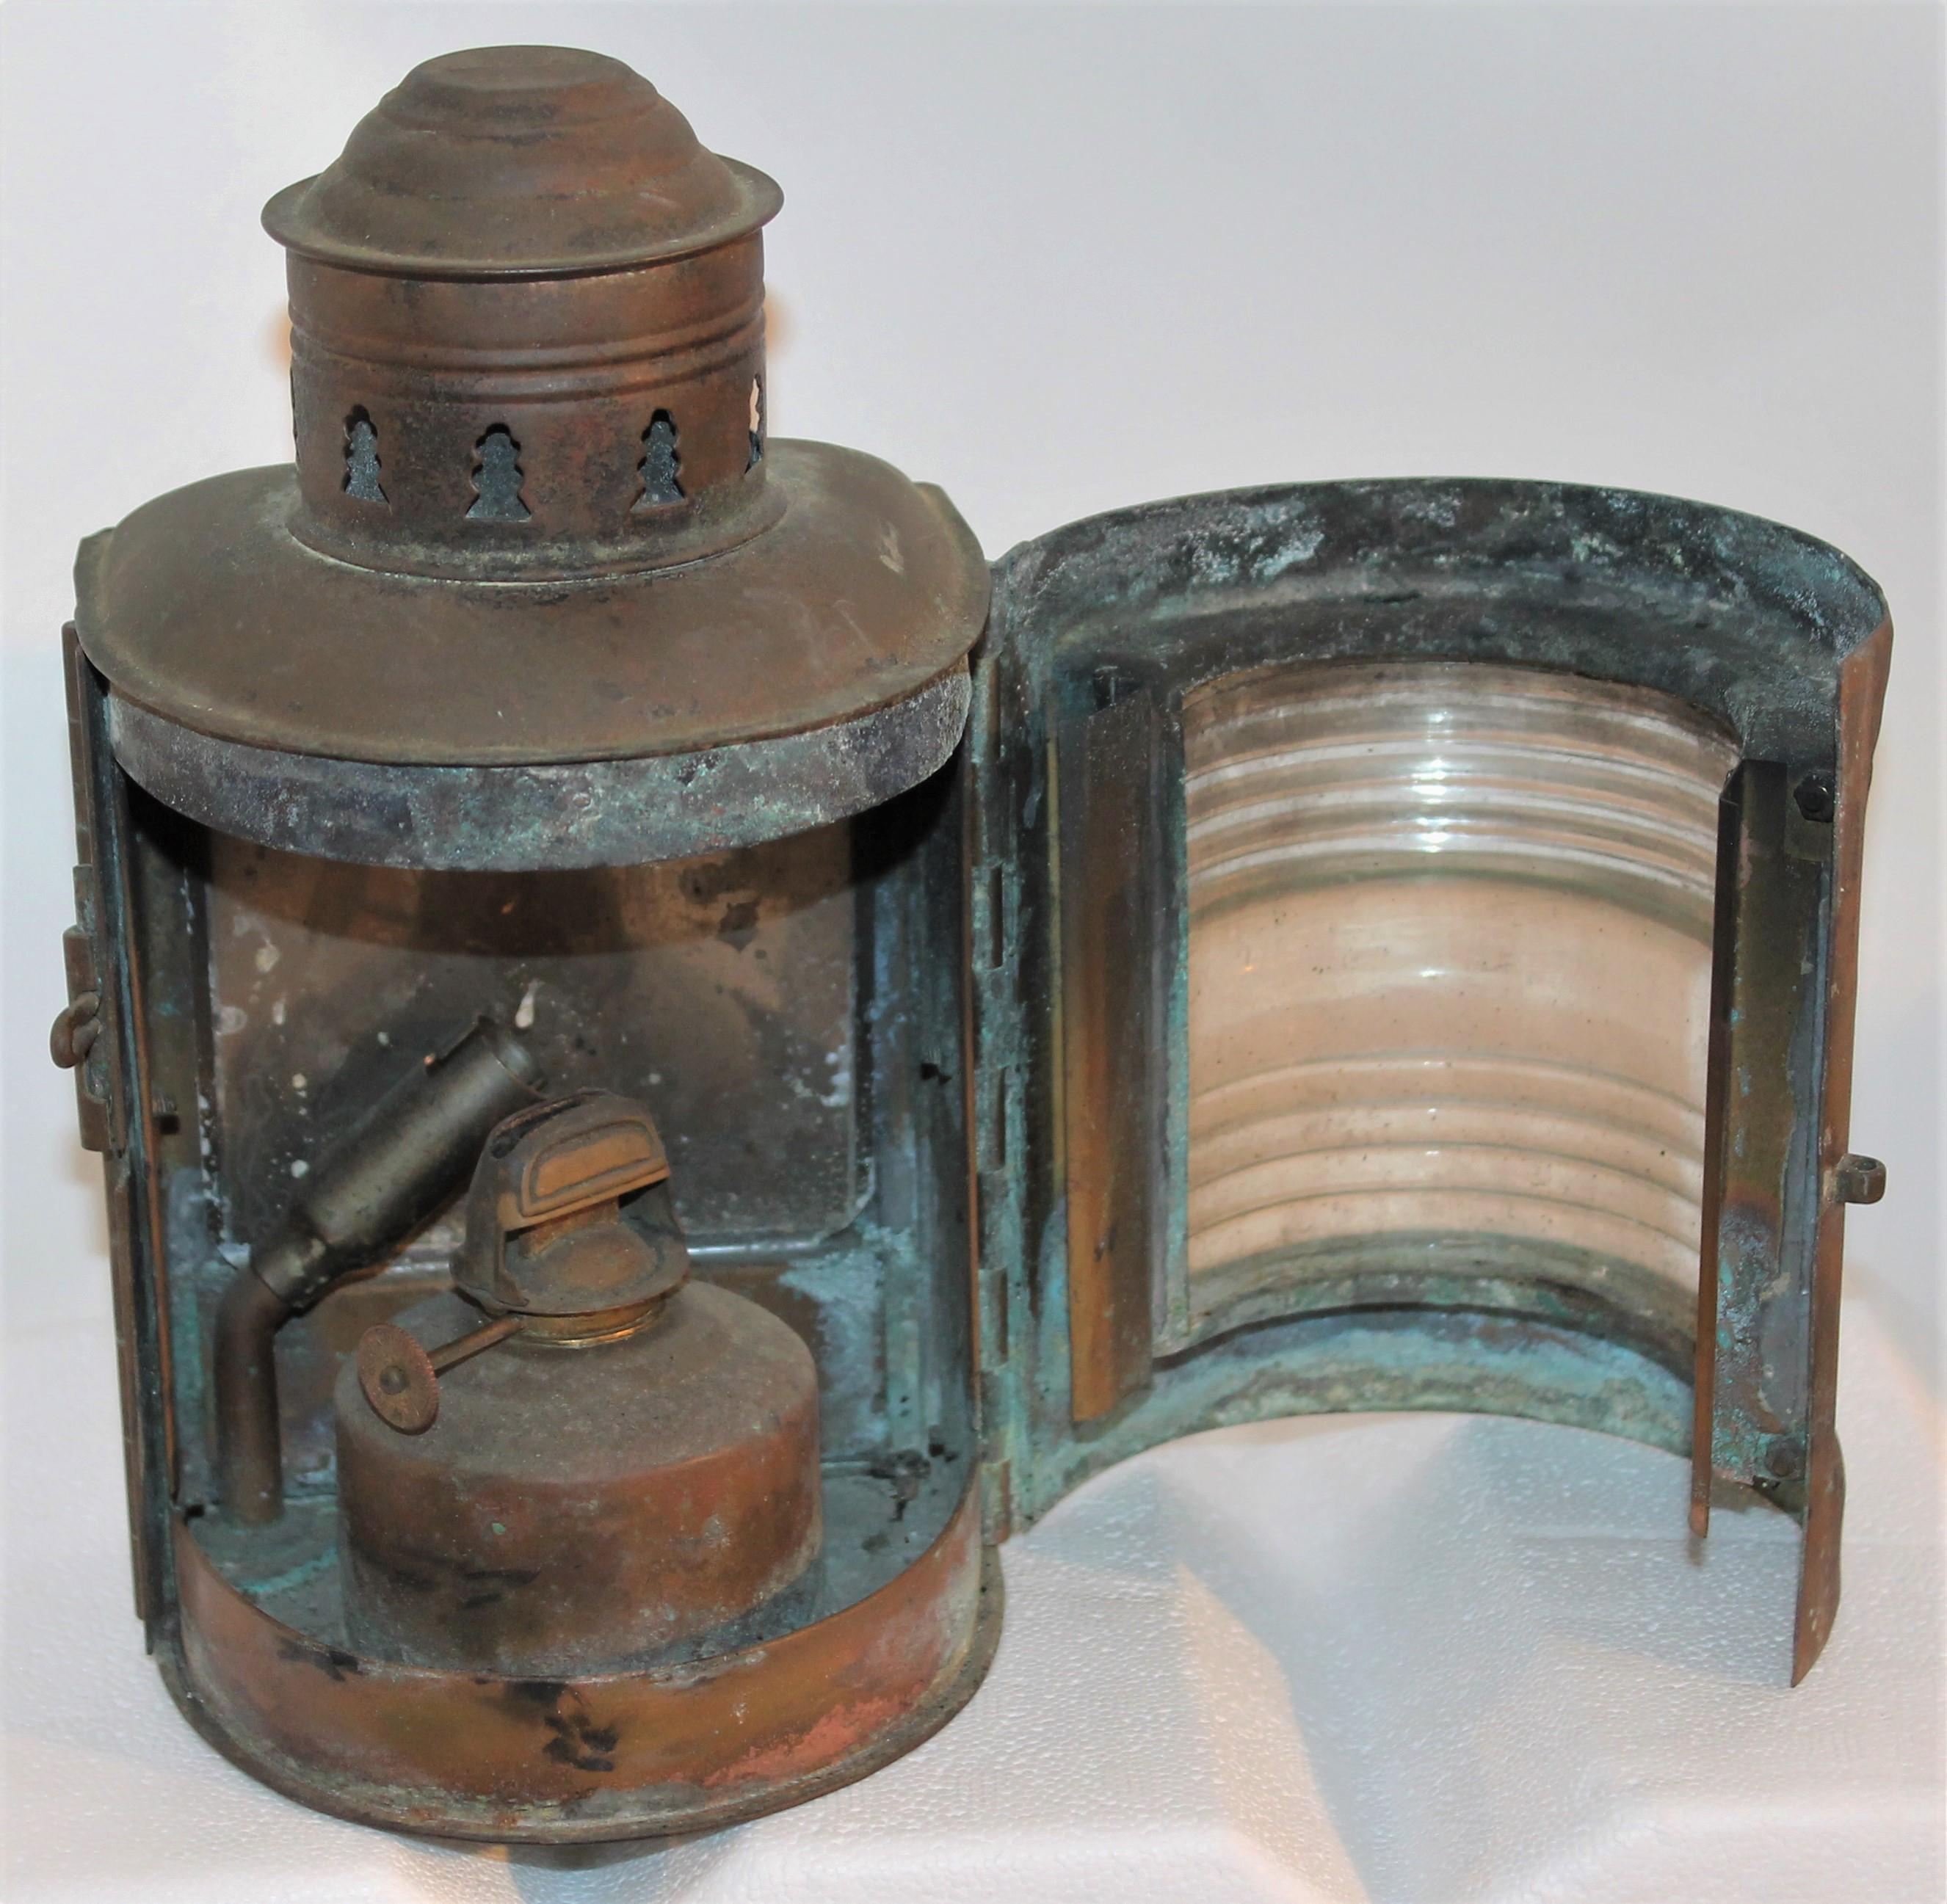 This working lantern is in a patinaed copper and in very good condition. Great nautical look in your beach house or bathroom. It retains the original 19thc glass globe cover.
Hurricane Tested
Marine Lights
Wilcox Crittenden & Co. Inc
Middleton